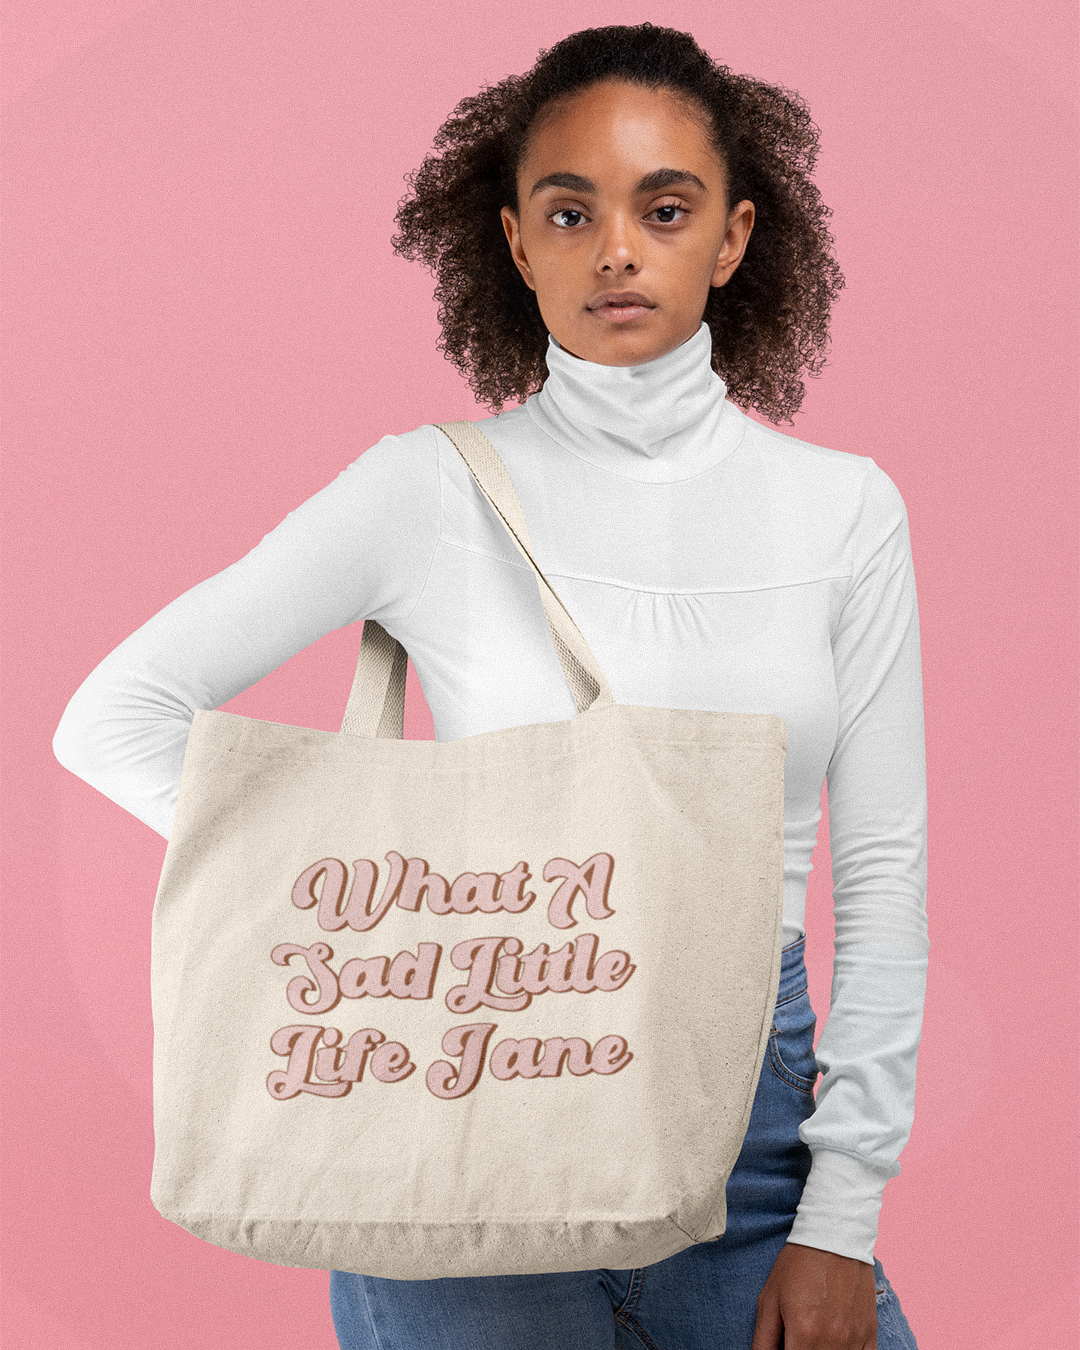 What A Sad Little Life Jane Tote Bag - Come Dine With Me Inspired Tote Bag - British Humour Shopper Tote Bag - What A Sad Little Life Jane (Come Dine With Me Inspired) Tote Bag